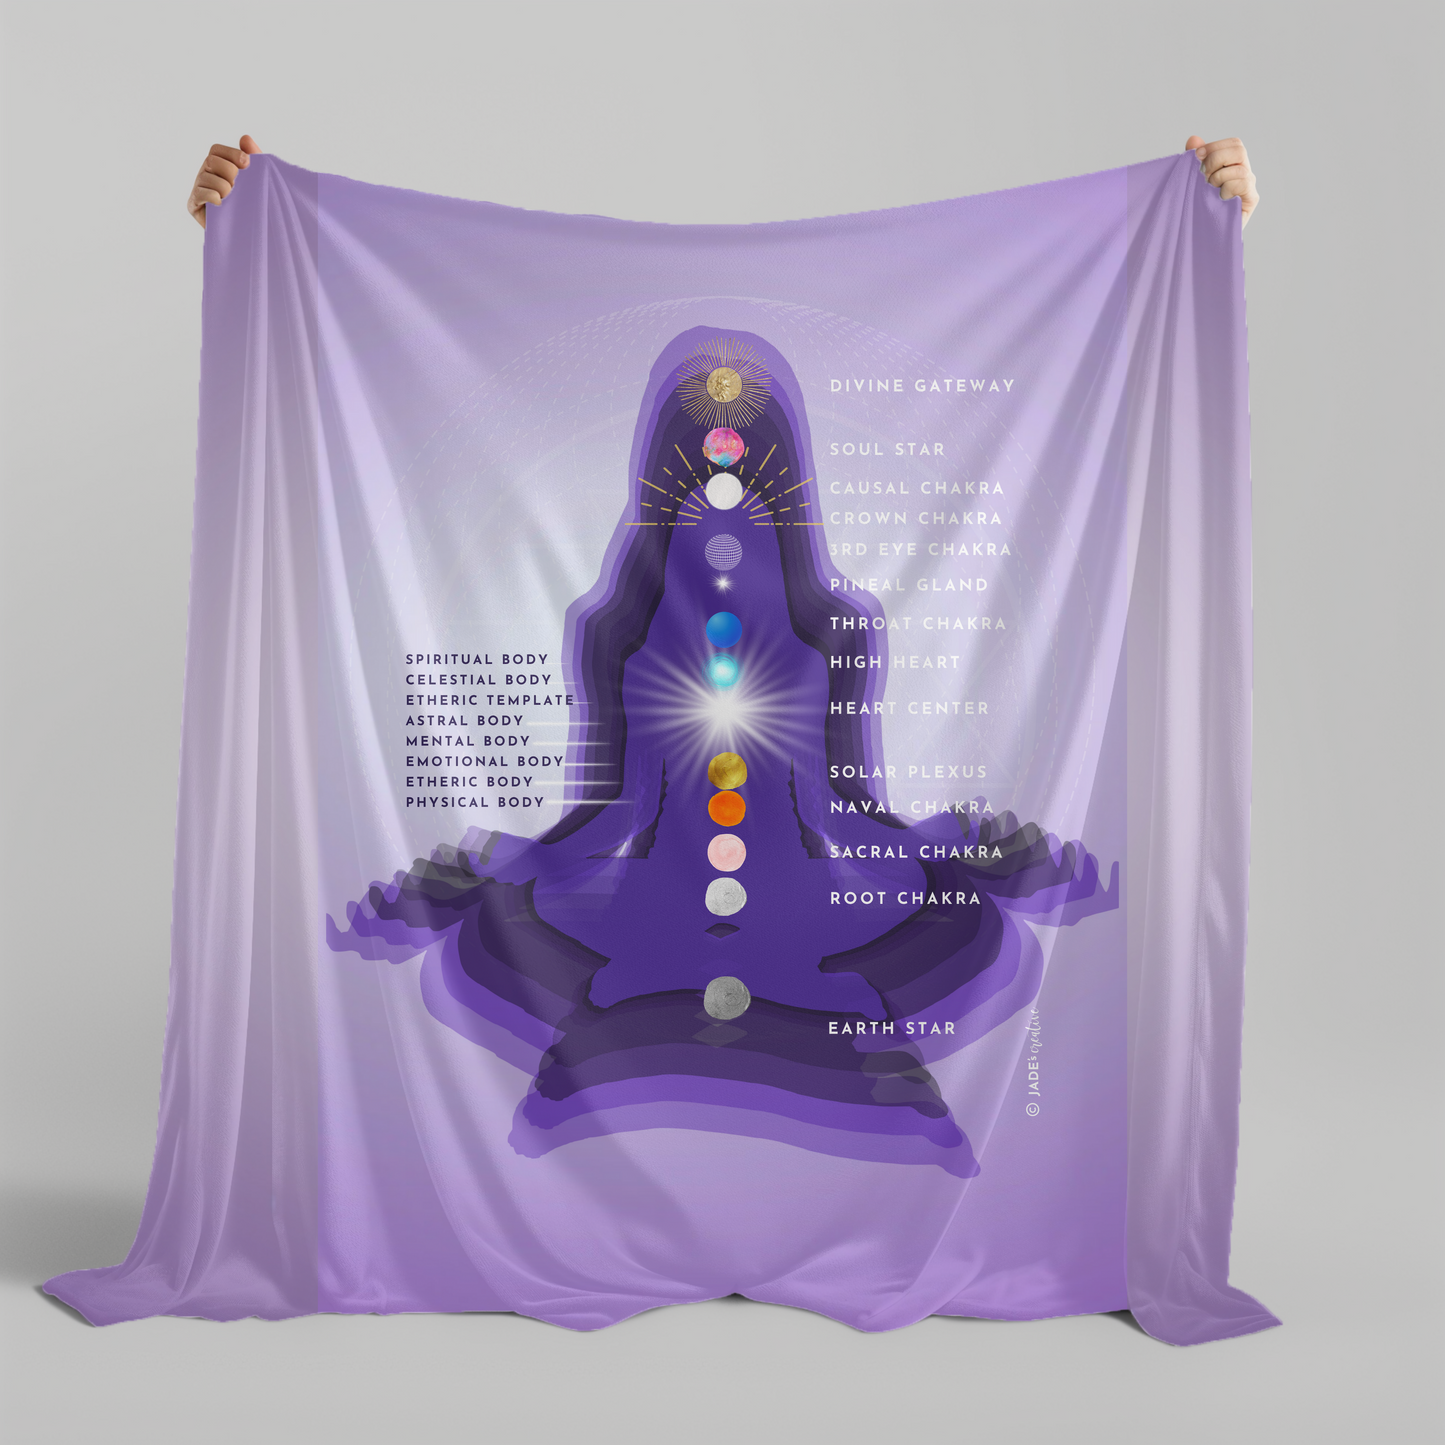 12 Chakra Bed Sheet, Proxy Distance Healing Massage Table Cloth, 5D Fifth Dimensional Chakras, Auric Fields, Energy Bodies, Expanded Chakra System